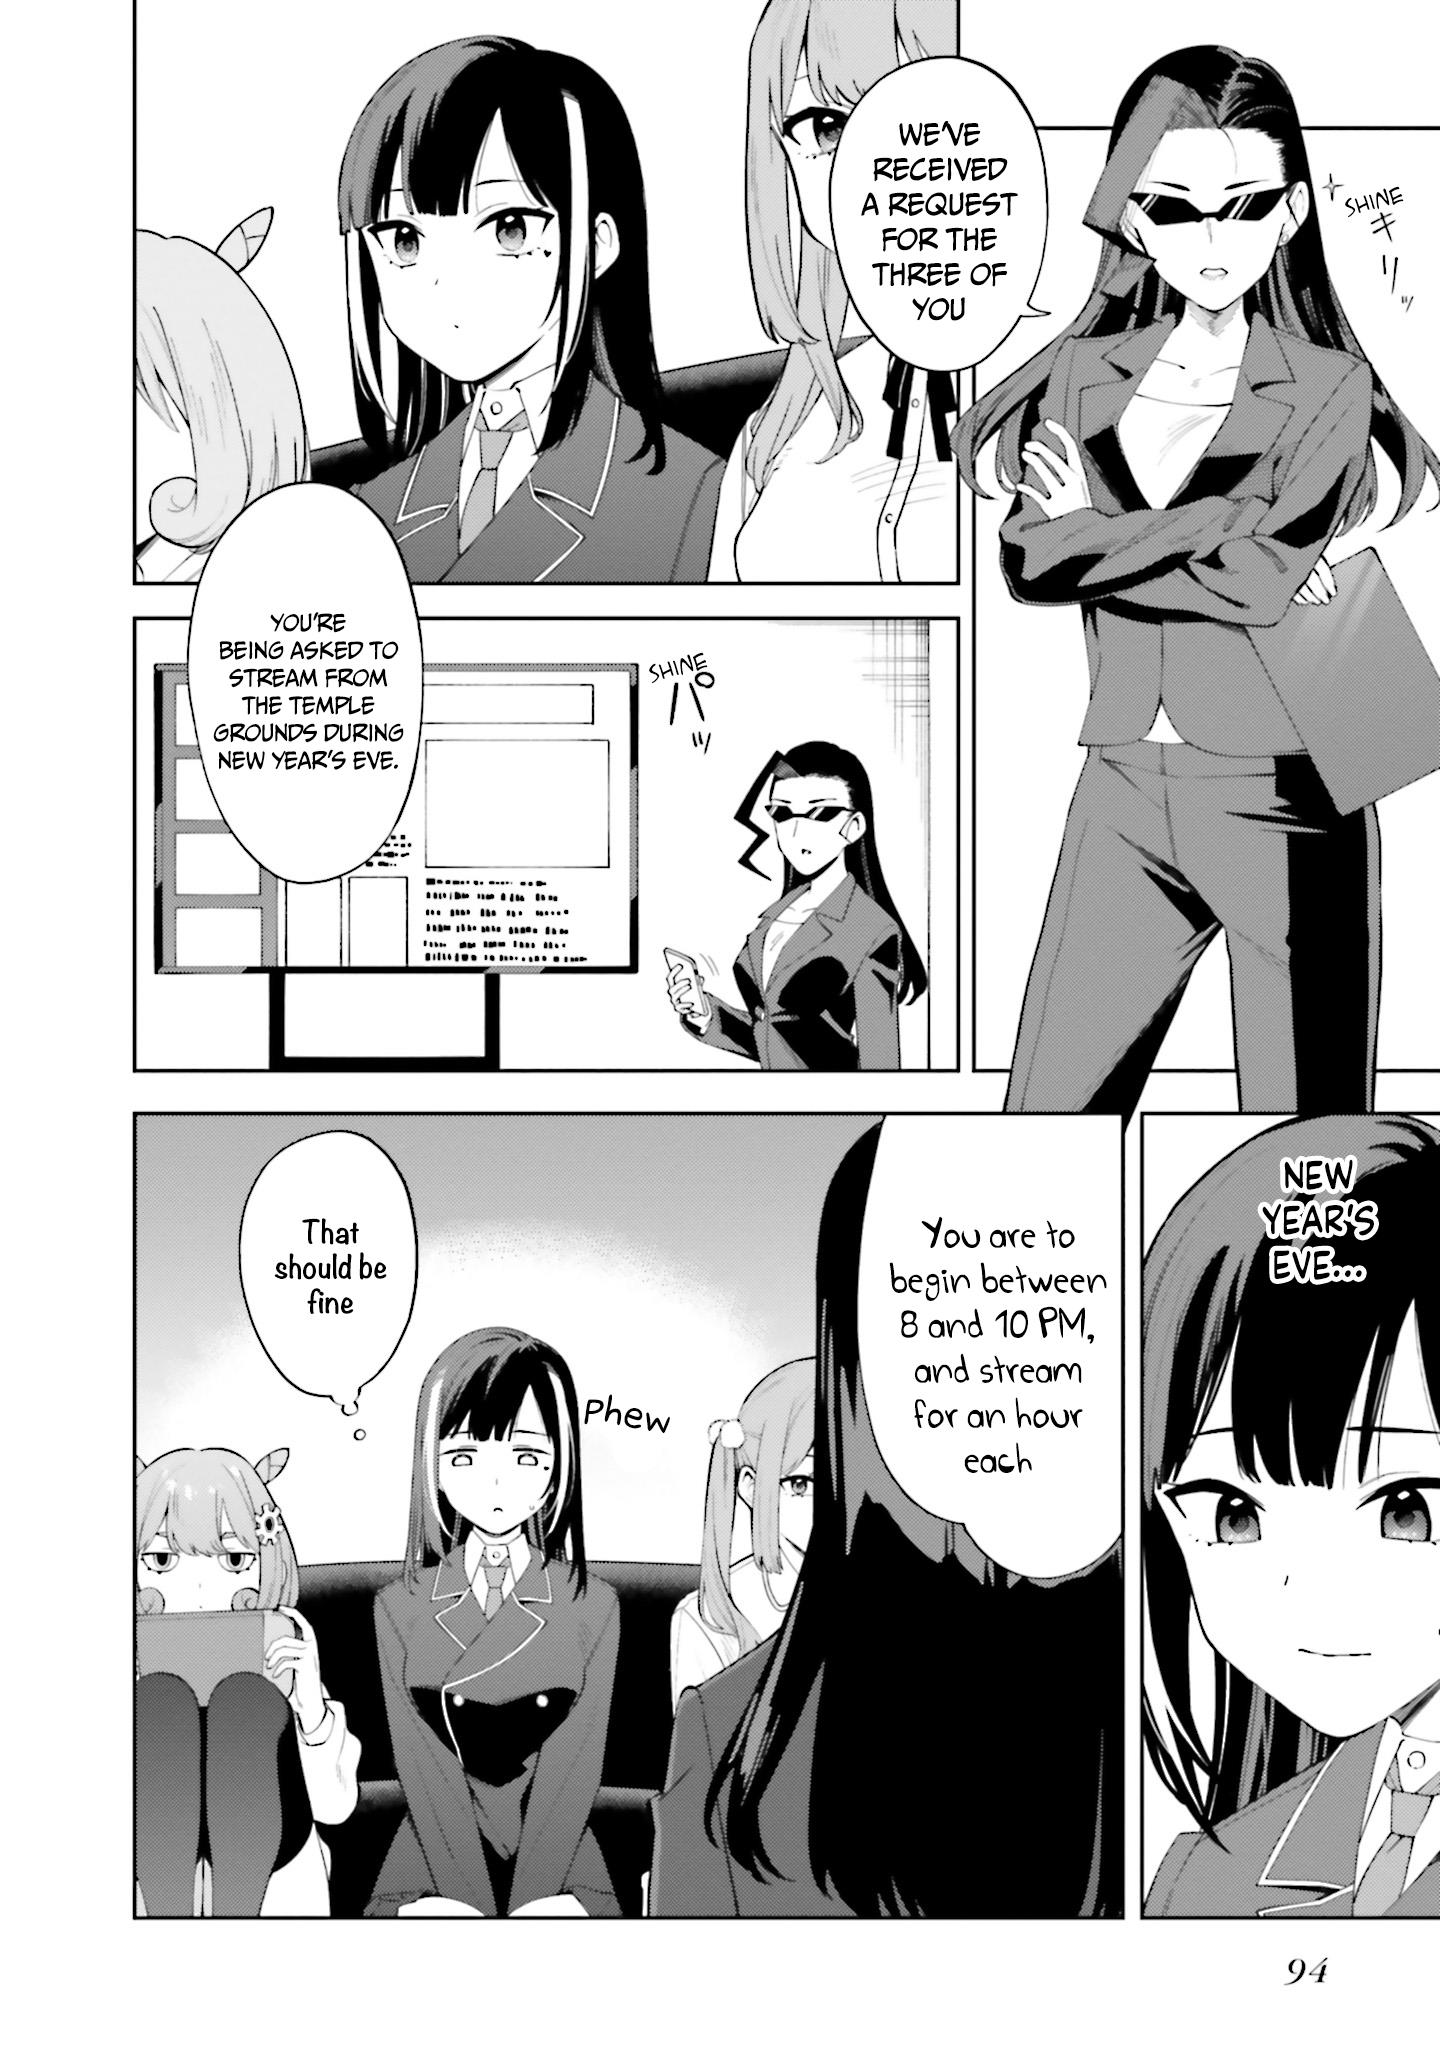 I Don't Understand Shirogane-San's Facial Expression At All - Page 3